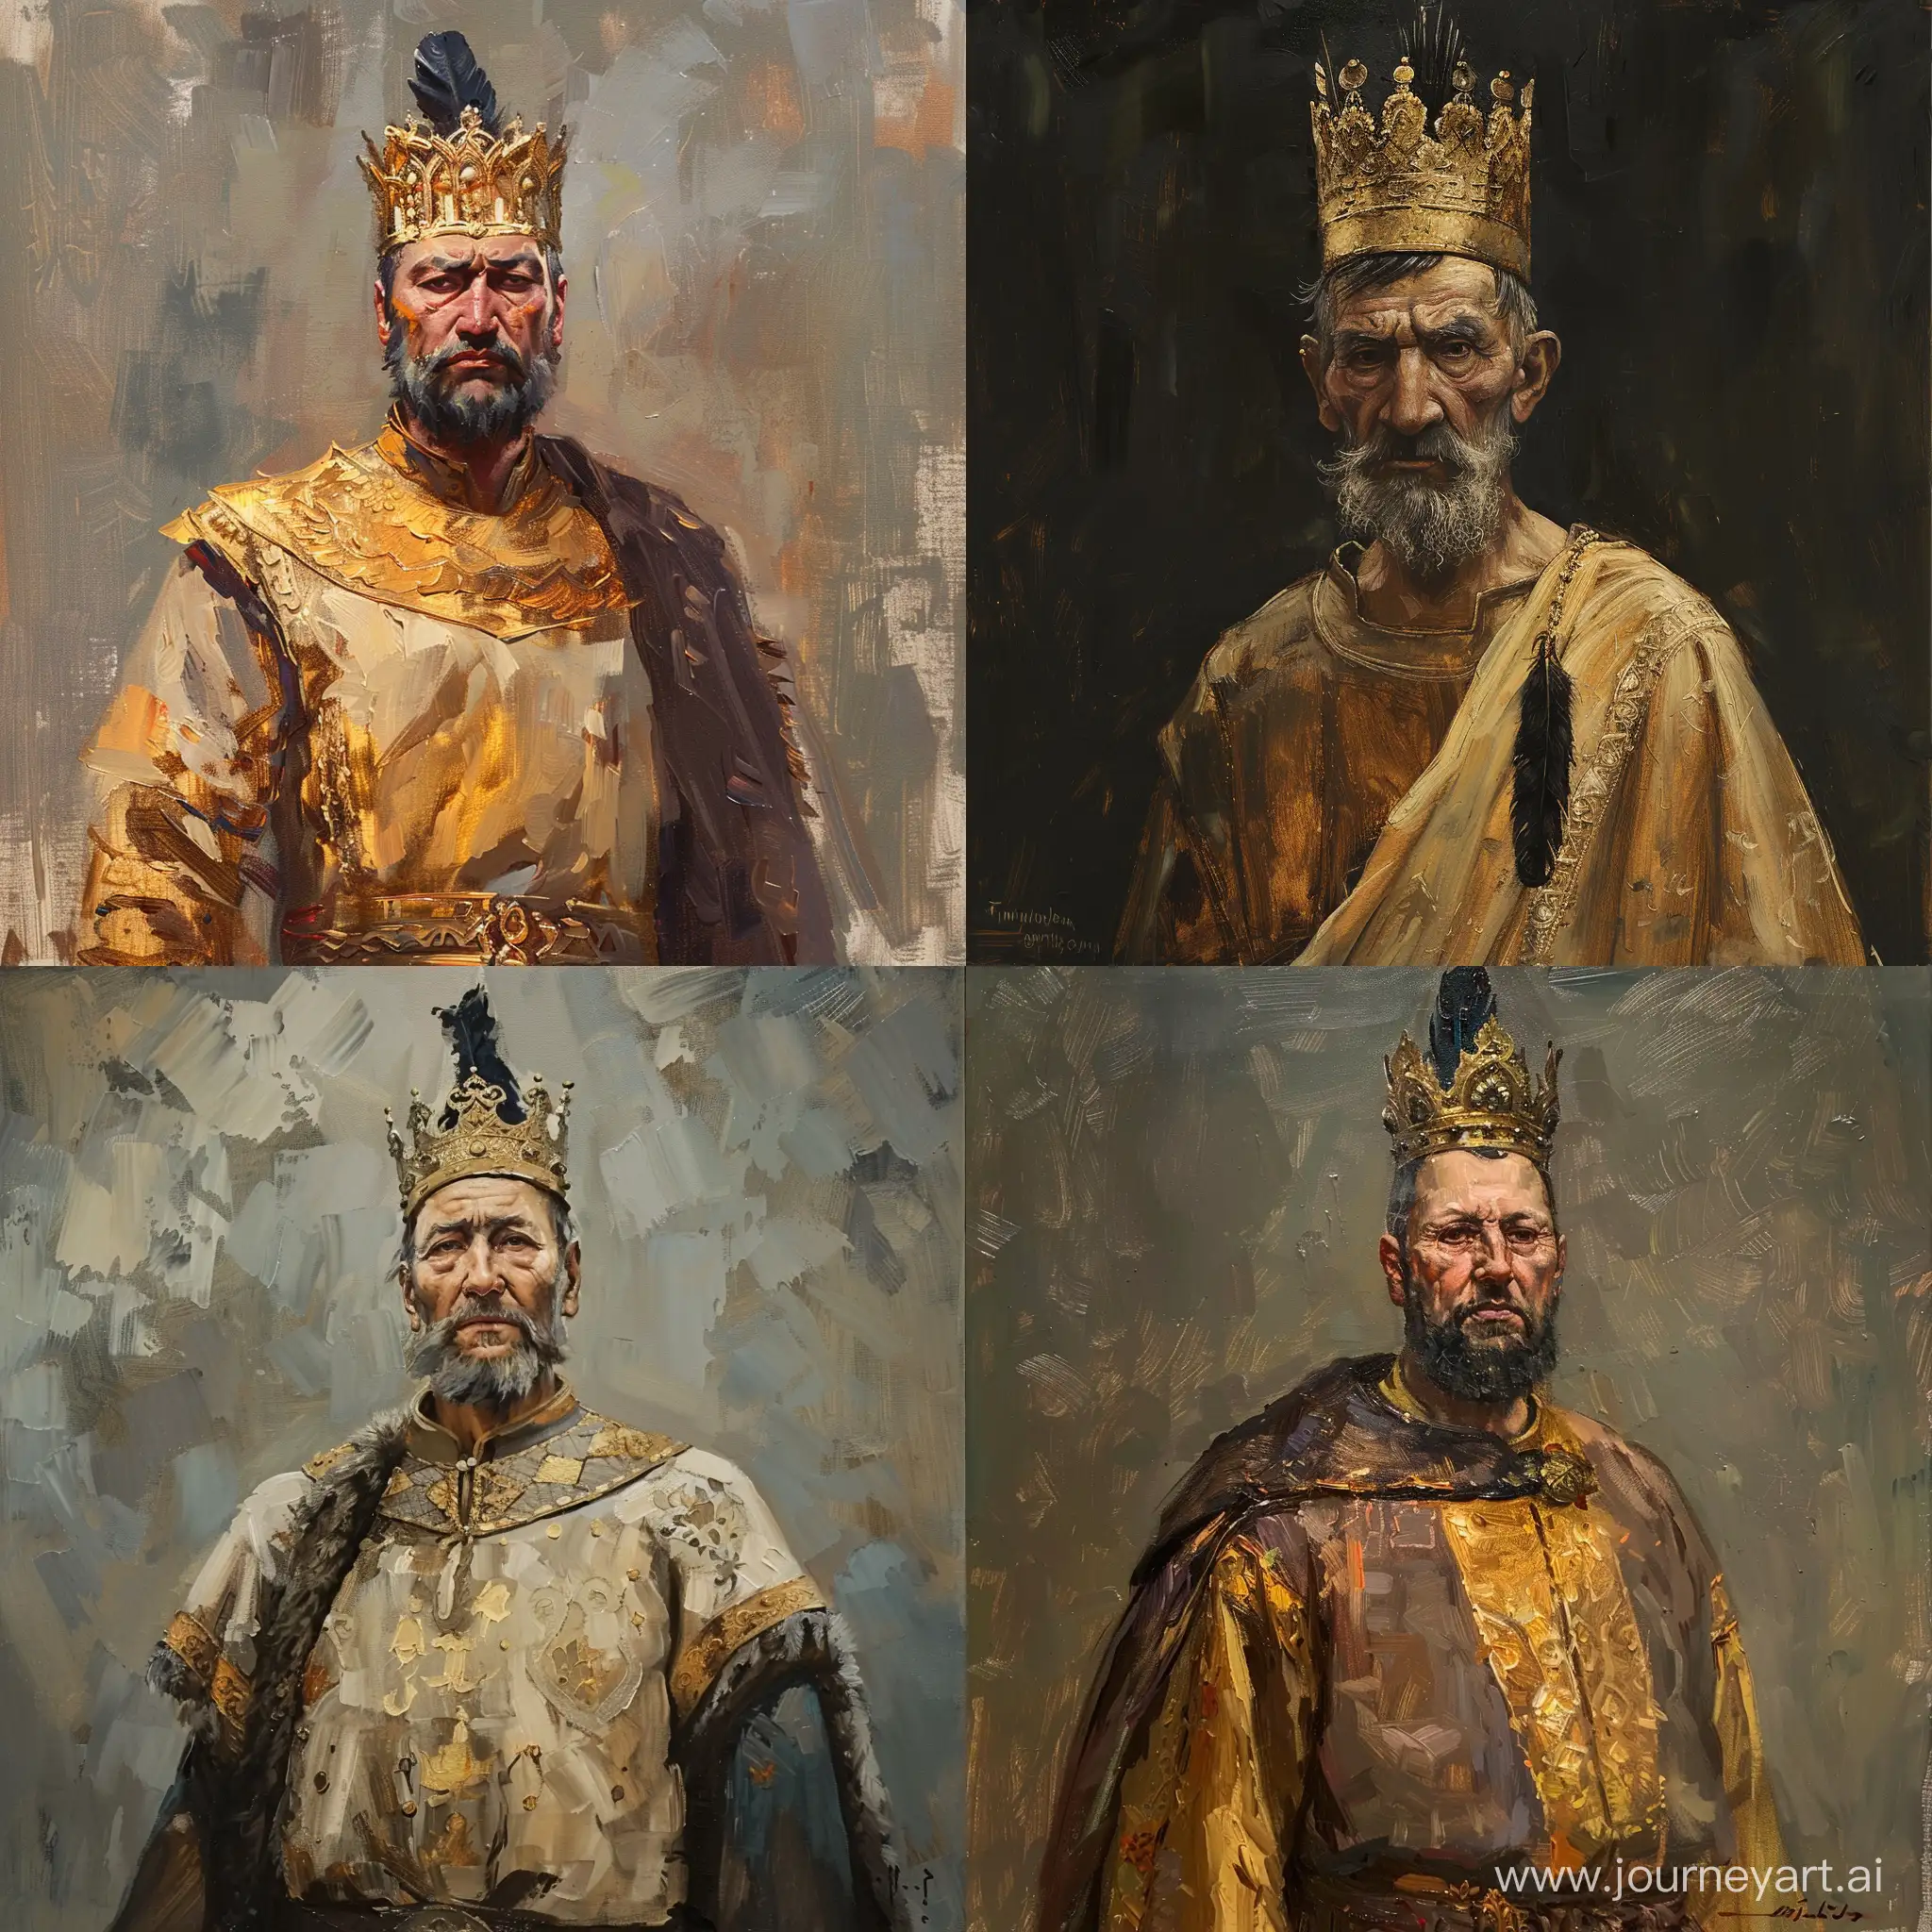 Oil painting of 60 years old Timur standing tall. Founder of Timurid Empire. Turko-Mongol genetics. Prominent face, high cheekbone, shaped short beard and Asian monolid slanted eyes. He is wearing a gold crown with a black feather on it. Luxury tunic and a short cloak on it. Oil painting. Brush strikes.